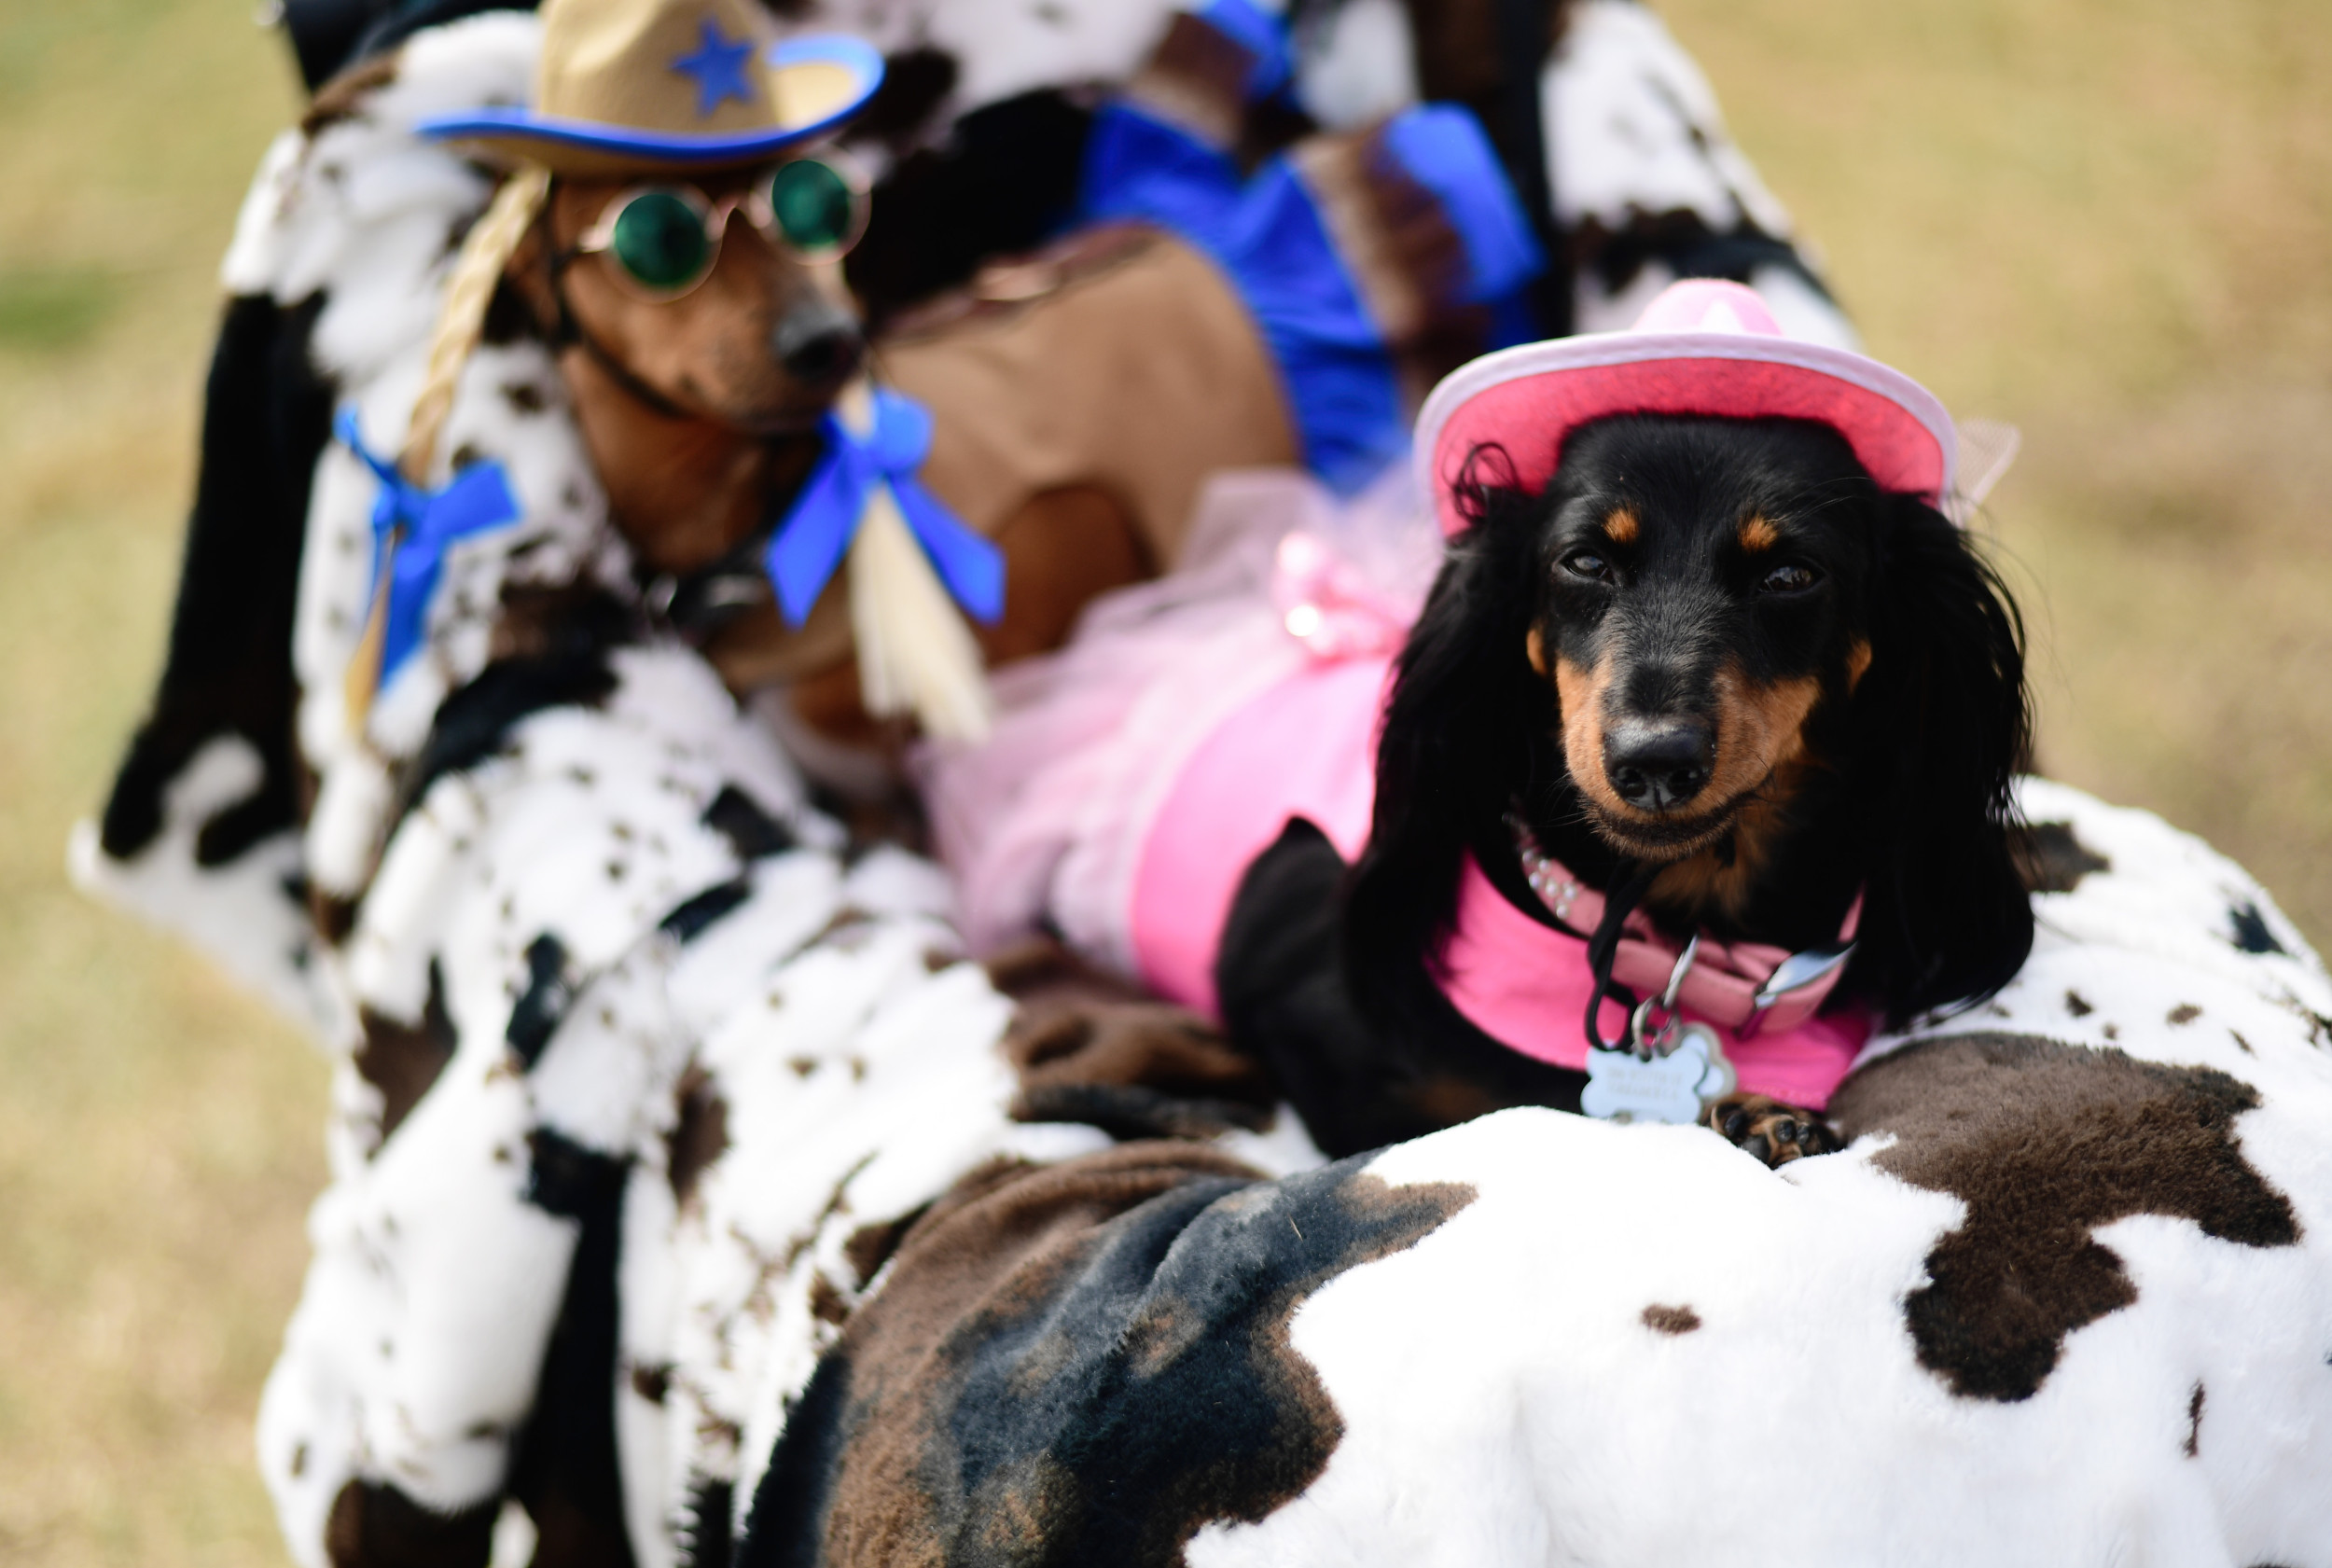 The Best Scary Halloween Costumes For Dogs, Ranked